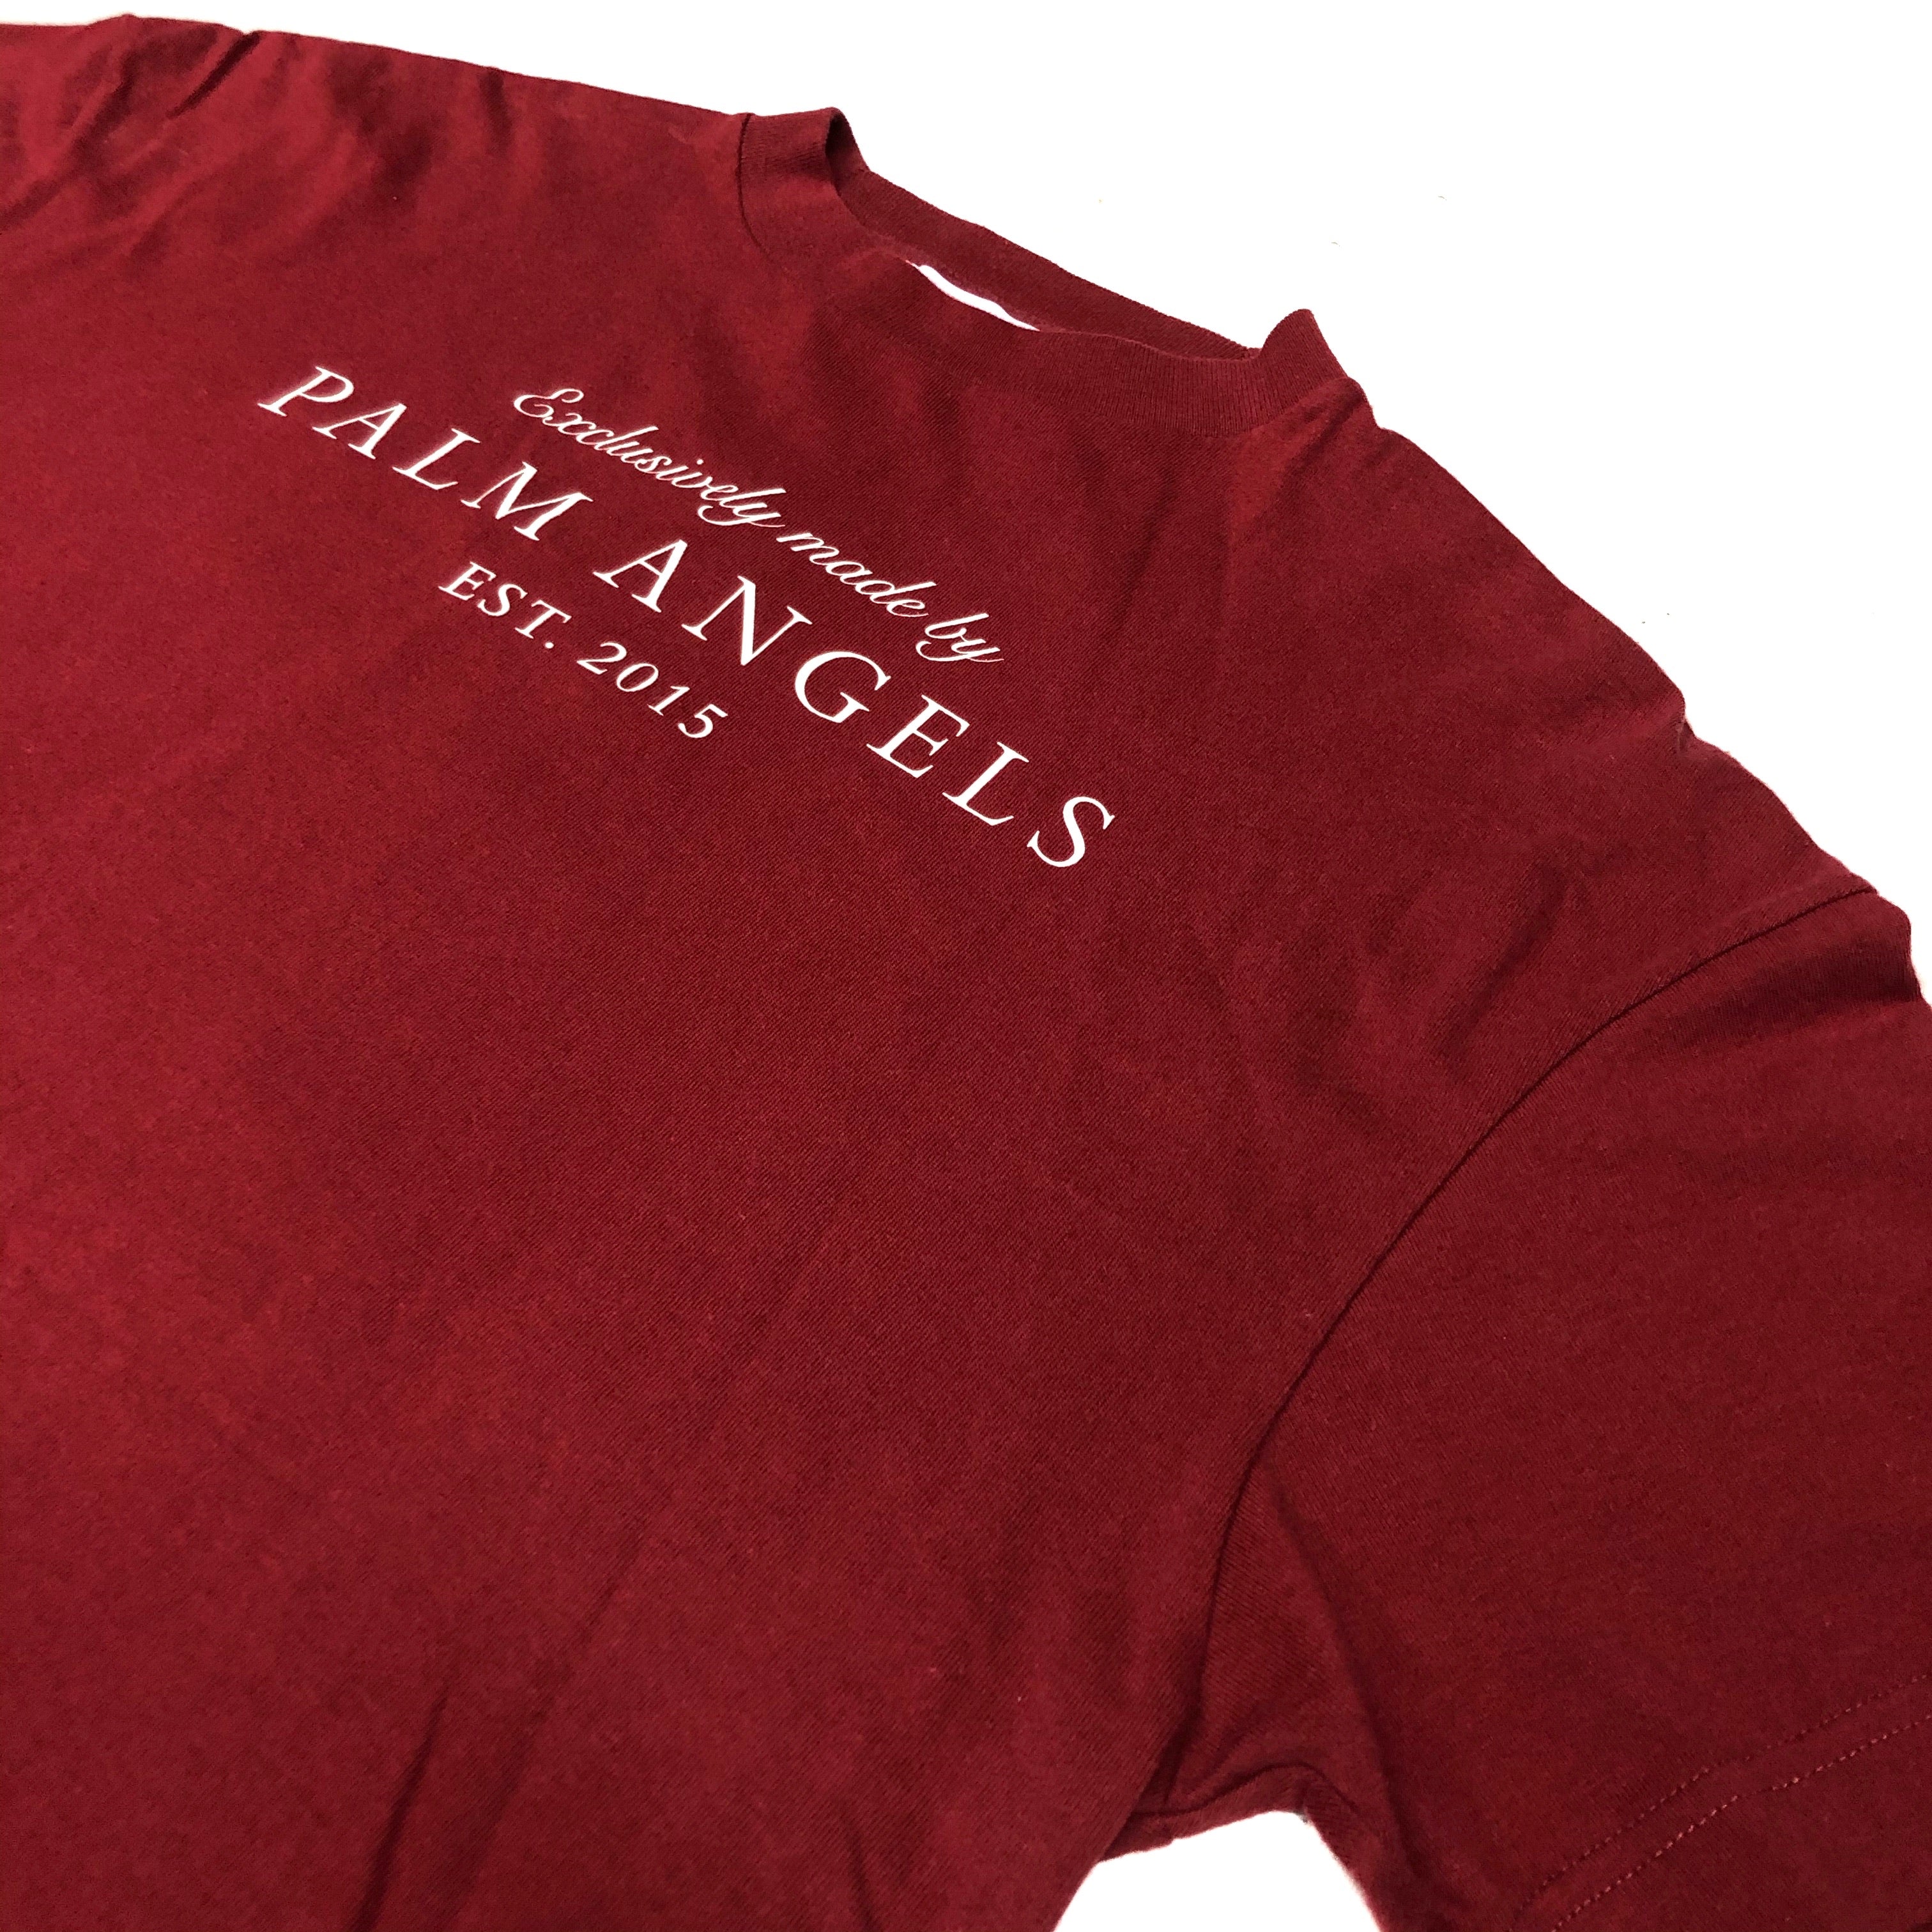 Palm Angels EST 2015 Spell Out Short Sleeved T Shirt with Back Print Initials